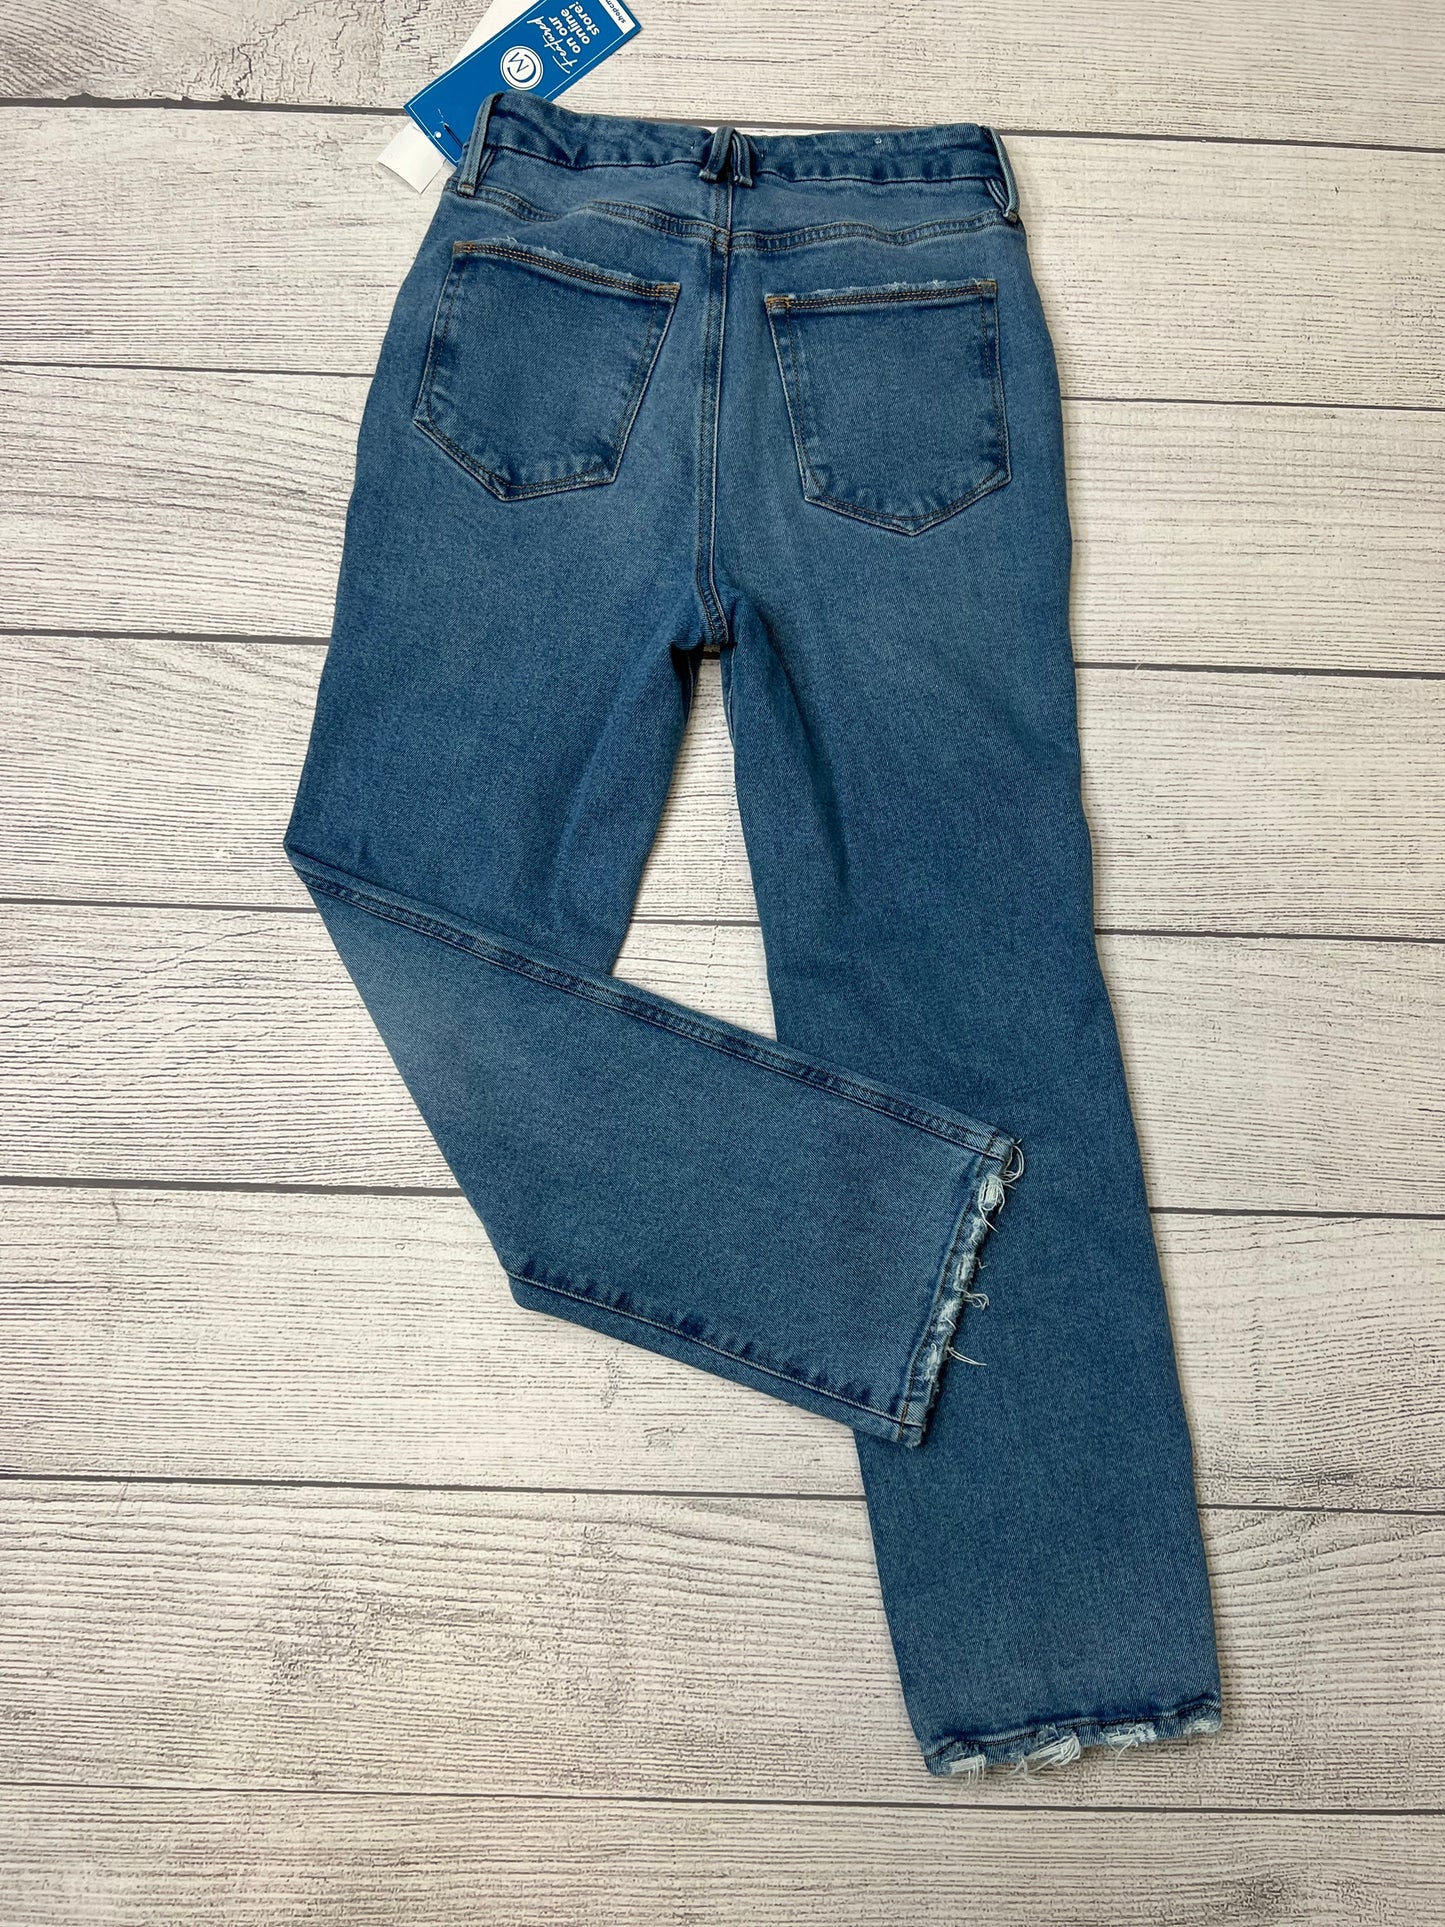 Jeans Designer By Good American  Size: 4